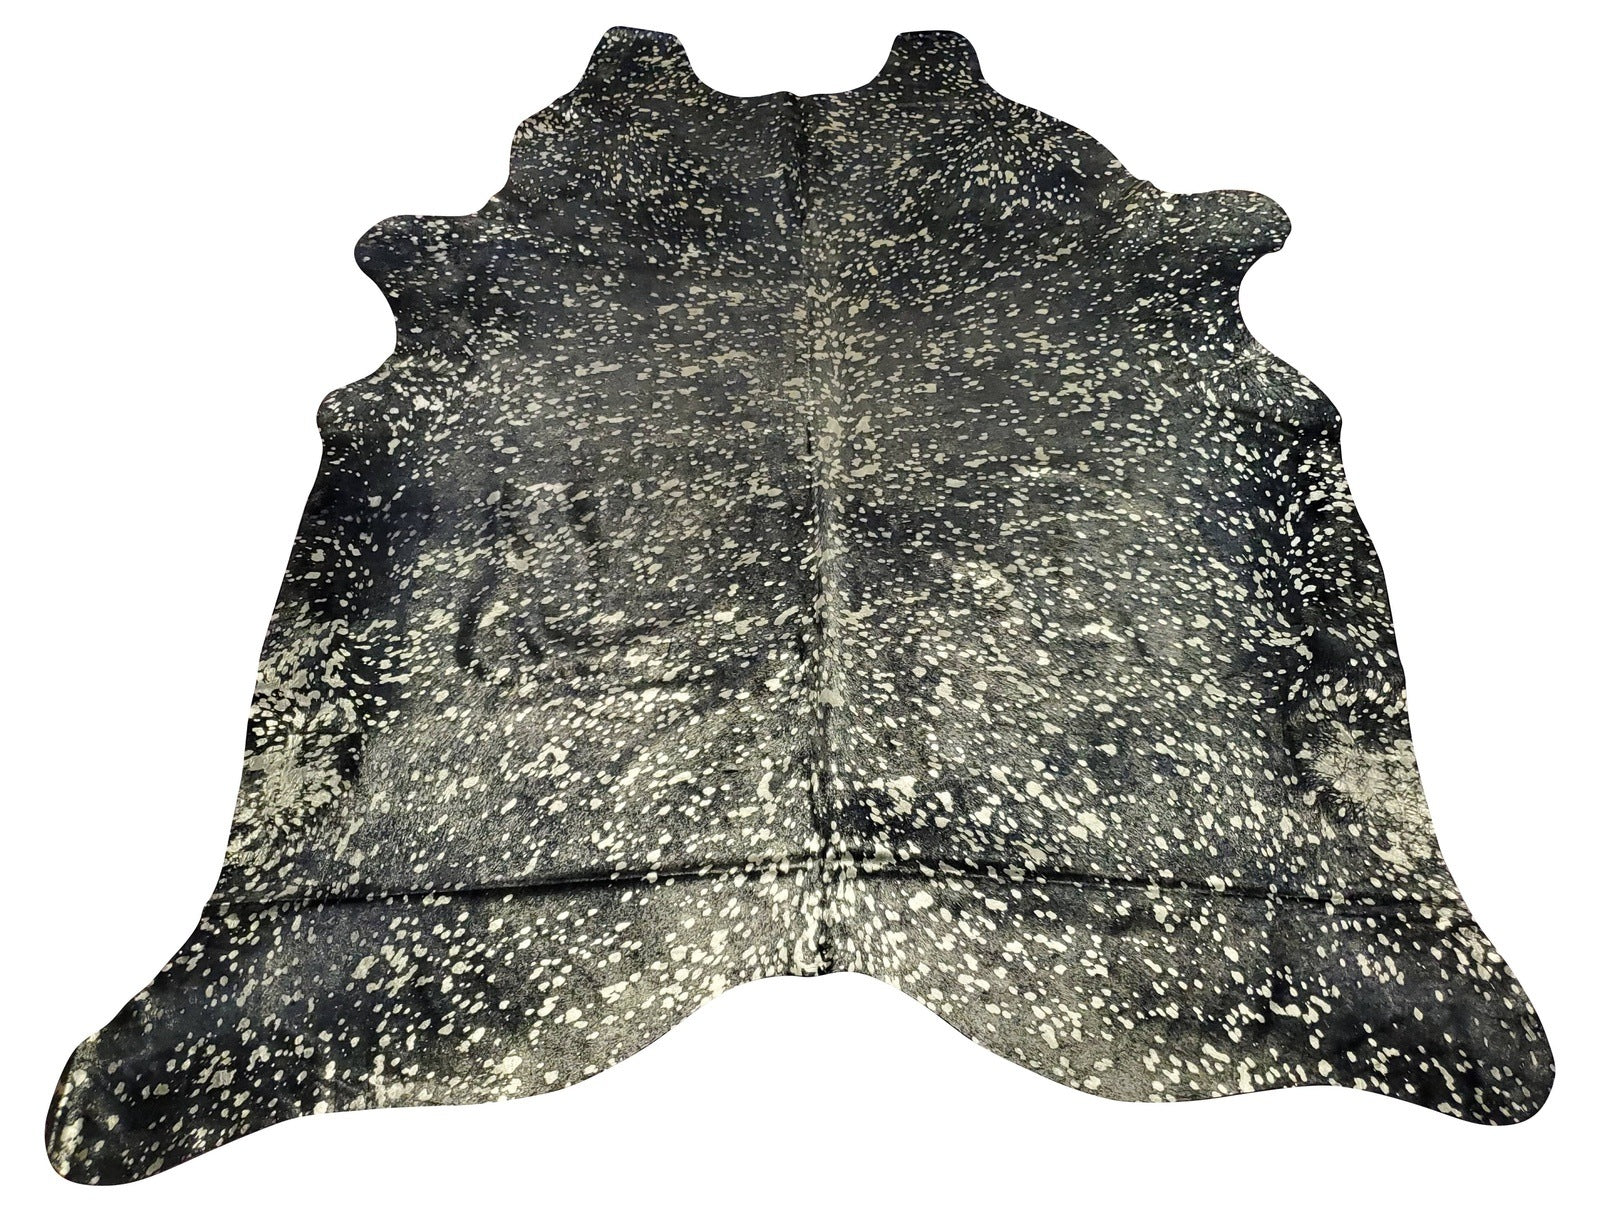 you will love this silver metallic cowhide rug!! The colors are beautiful and the size is just what I needed.